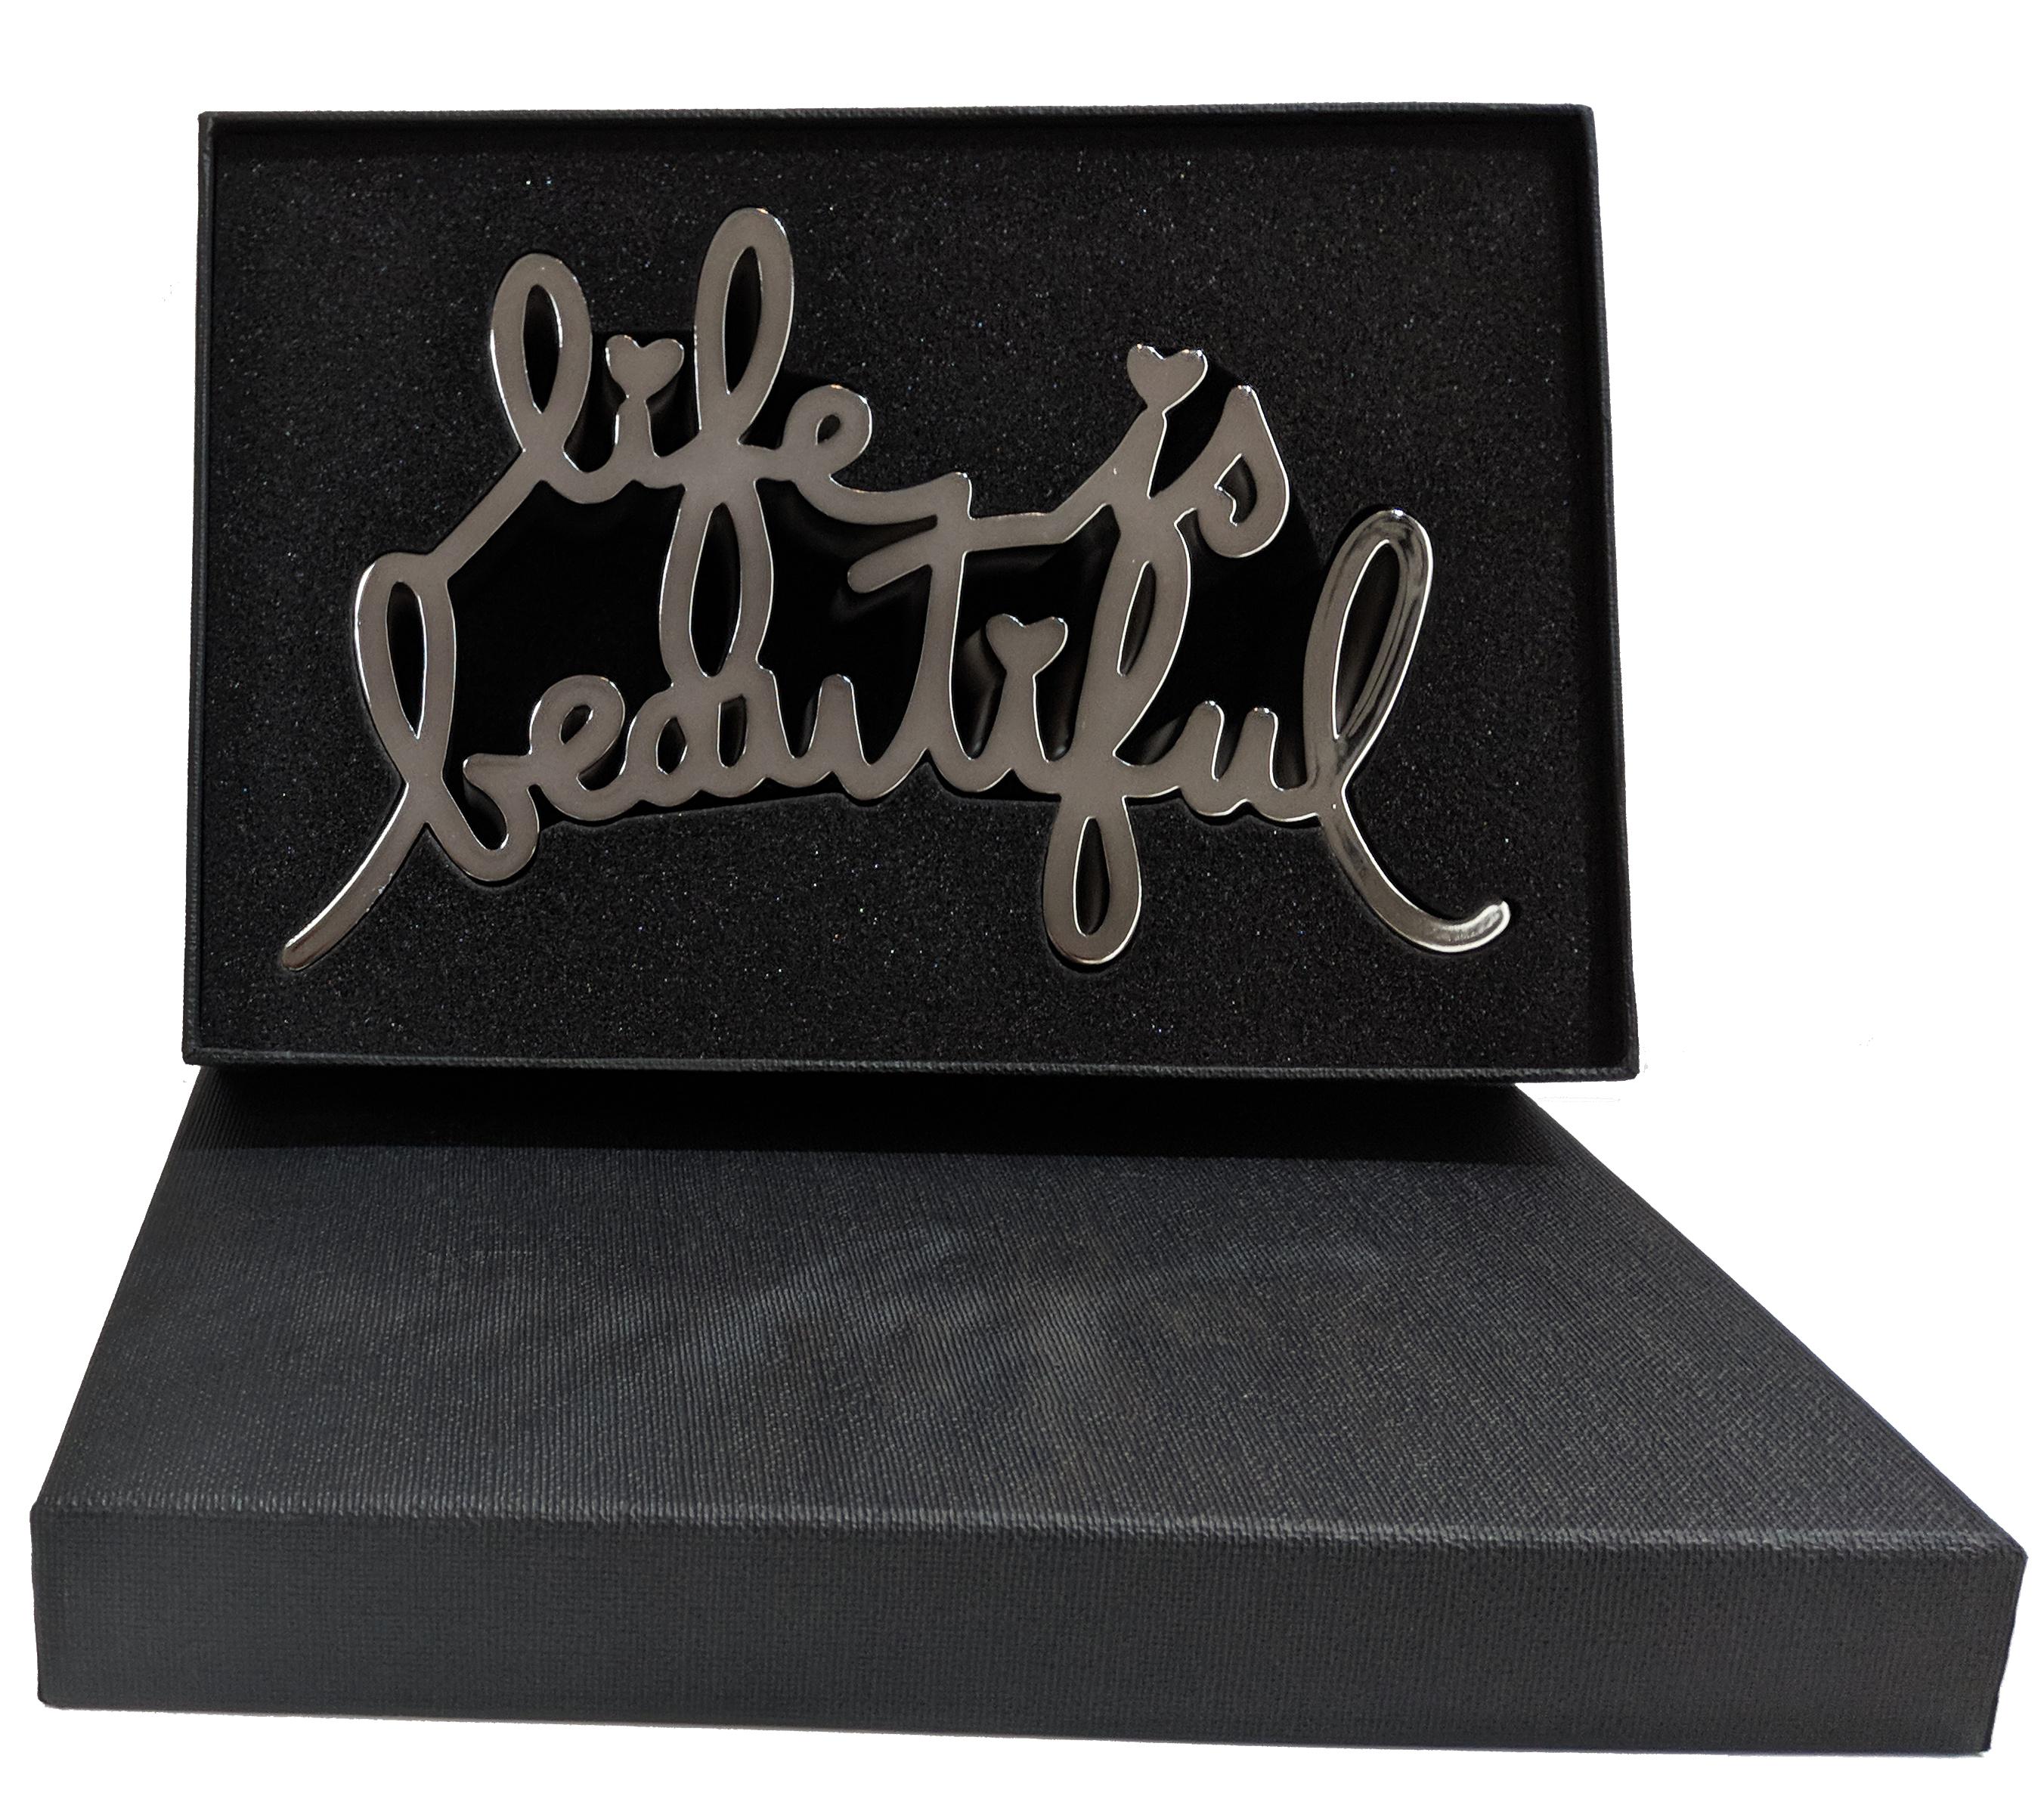 LIFE IS BEAUTIFUL (HARD CANDY SILVER) - Black Figurative Sculpture by Mr Brainwash